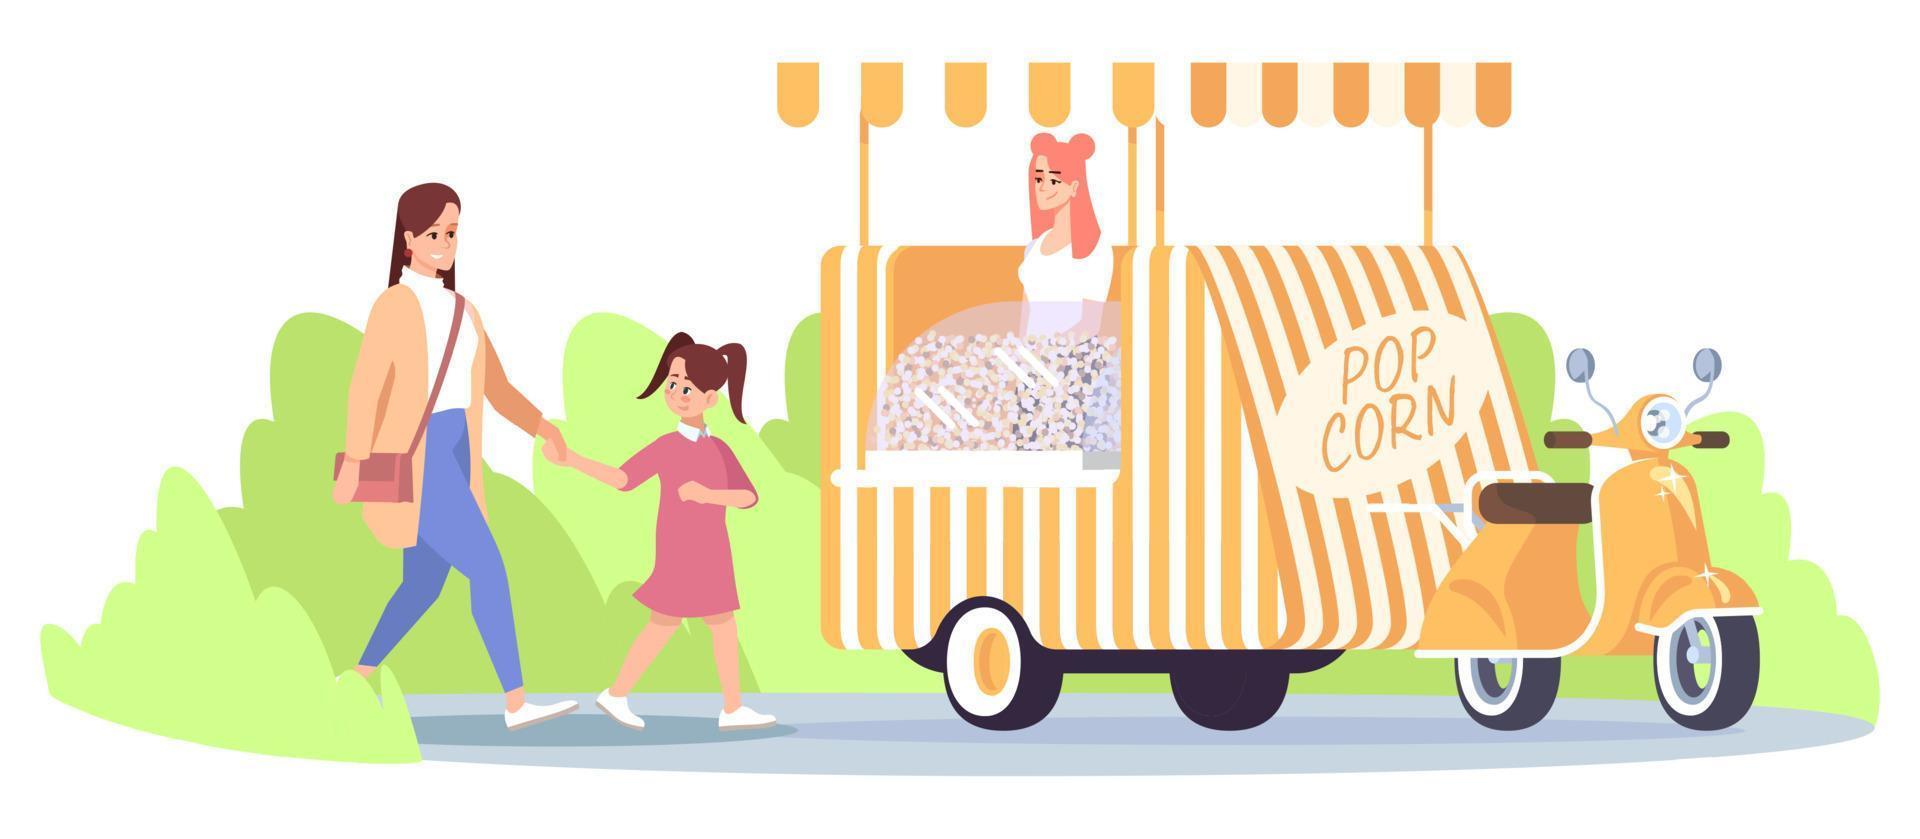 Popcorn food truck flat vector illustration. Mother with daughter walking for buying pop corn at city park. Street food vehicle, vendor, buyers isolated cartoon characters on white background